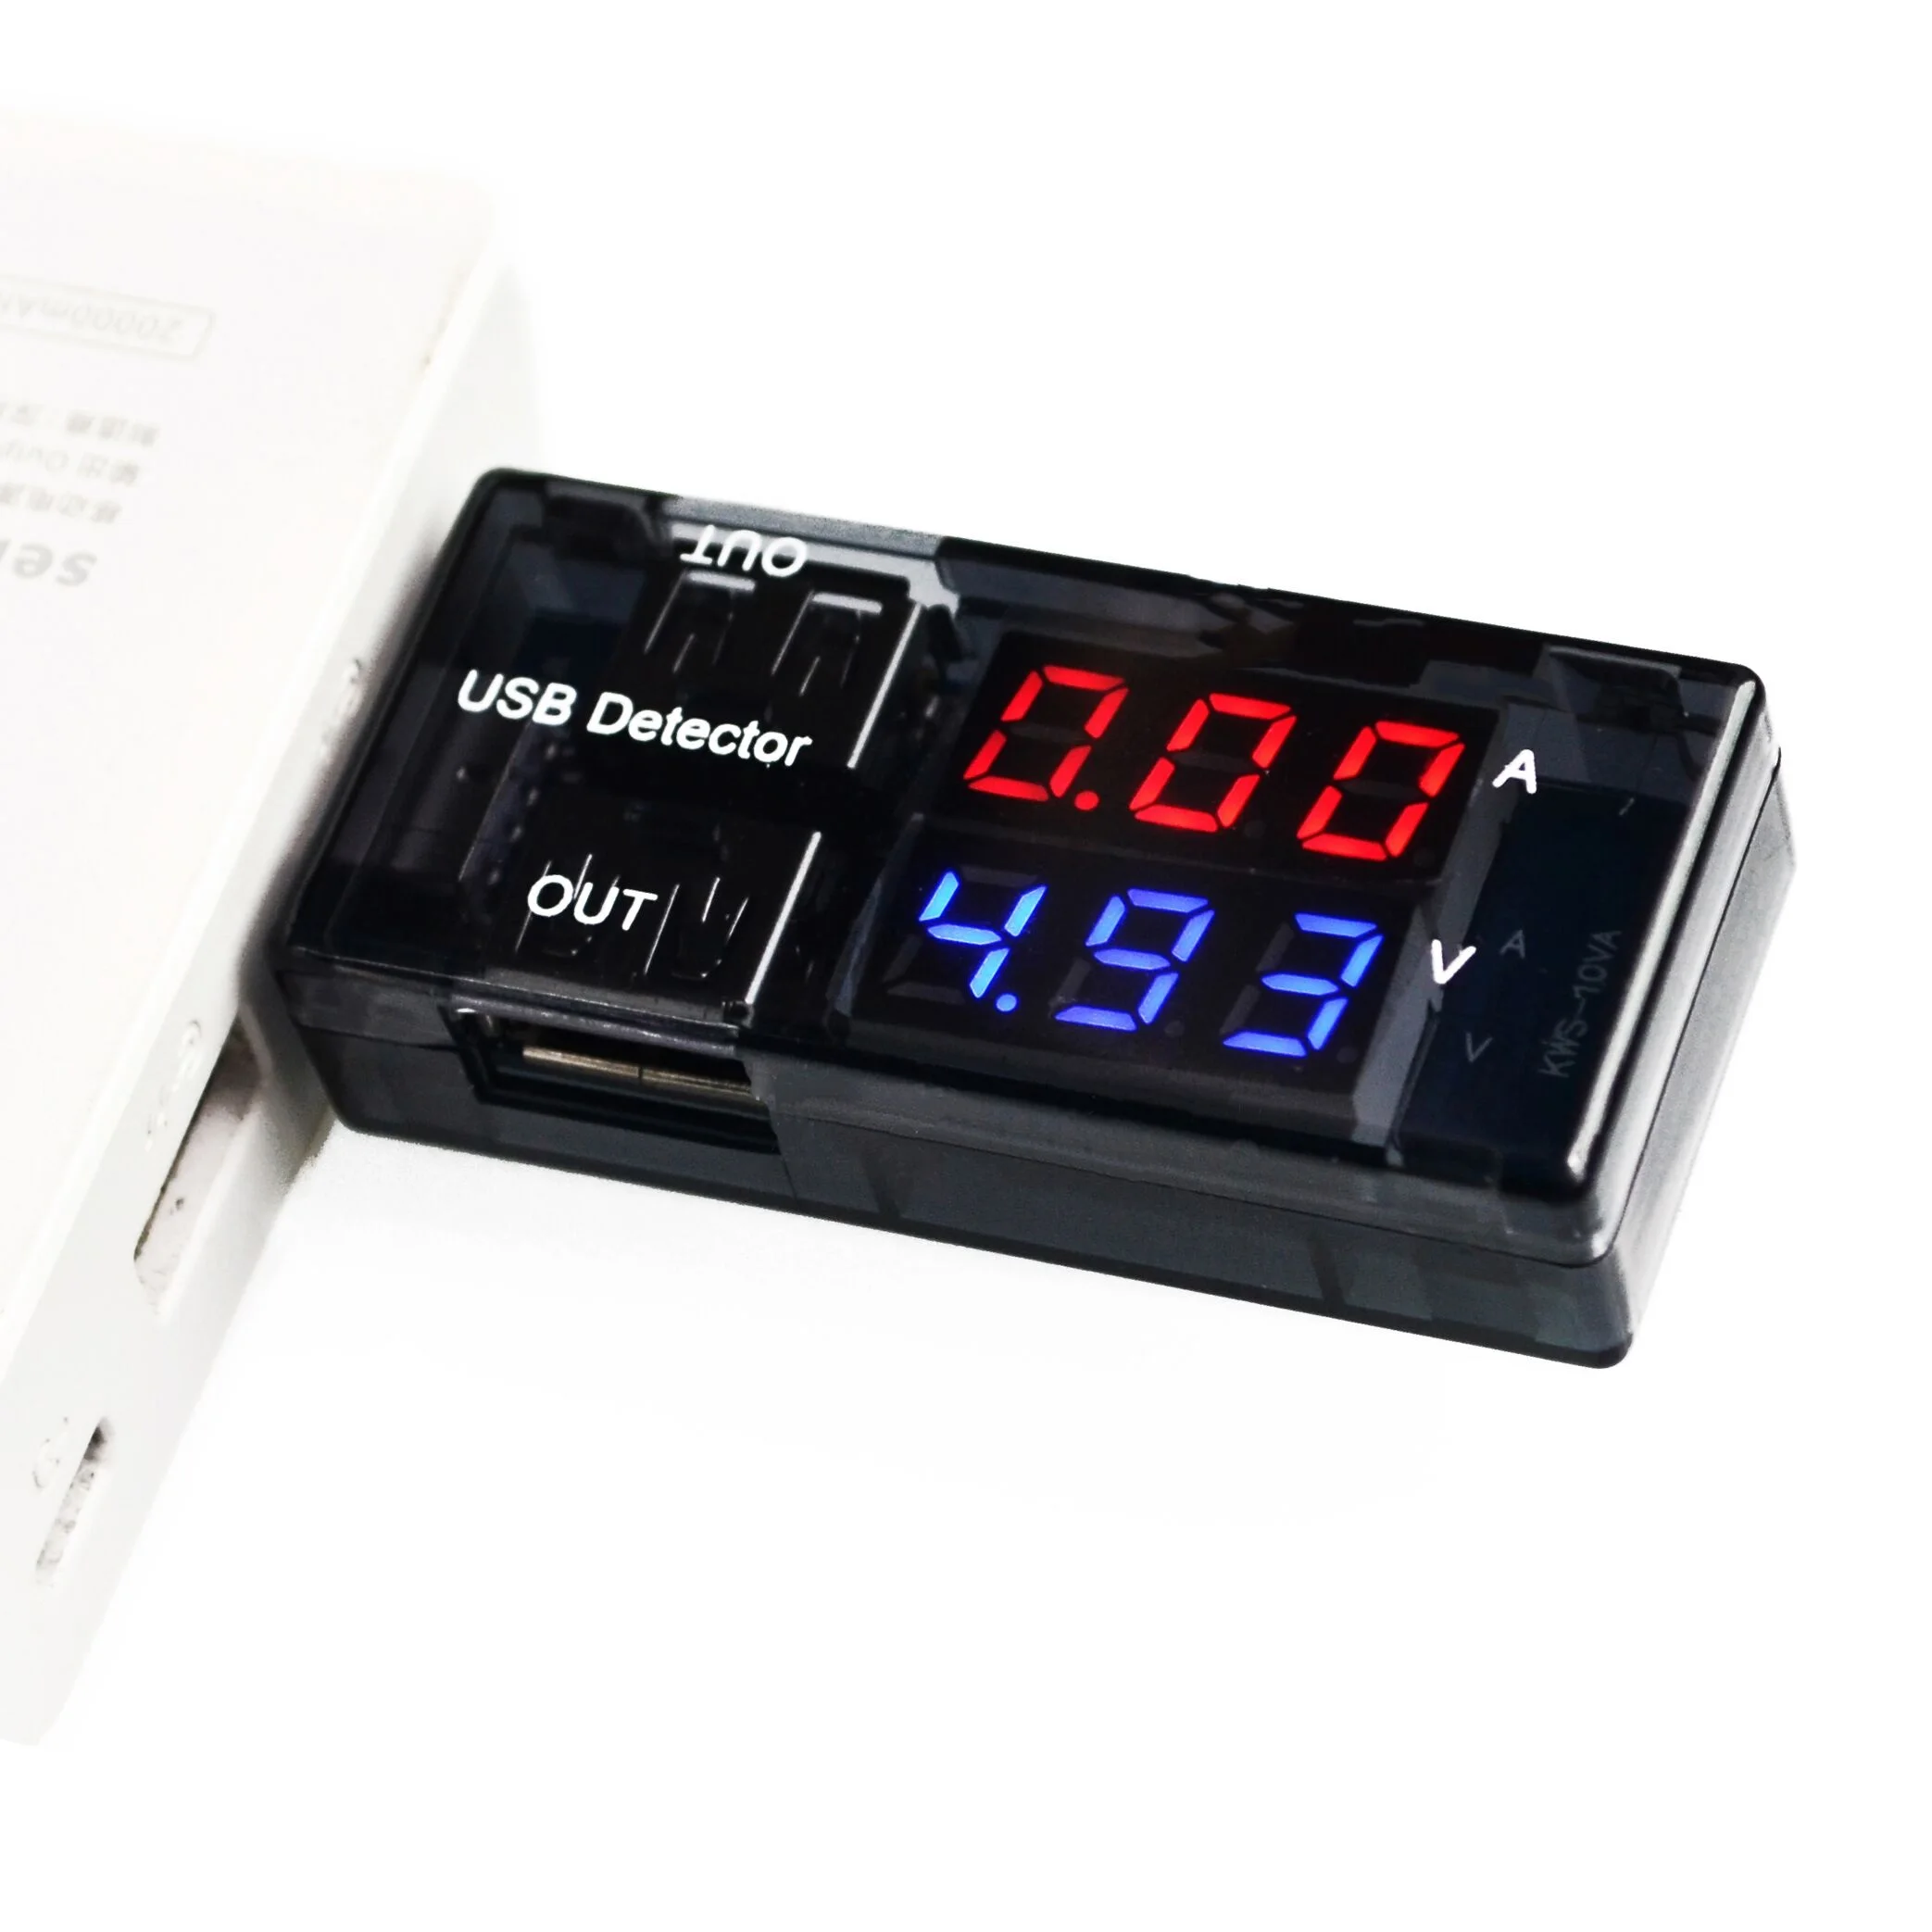 

USB Current Voltage Tester Meter USB Voltage Ammeter USB Detector Double Row Shows New 20% Off